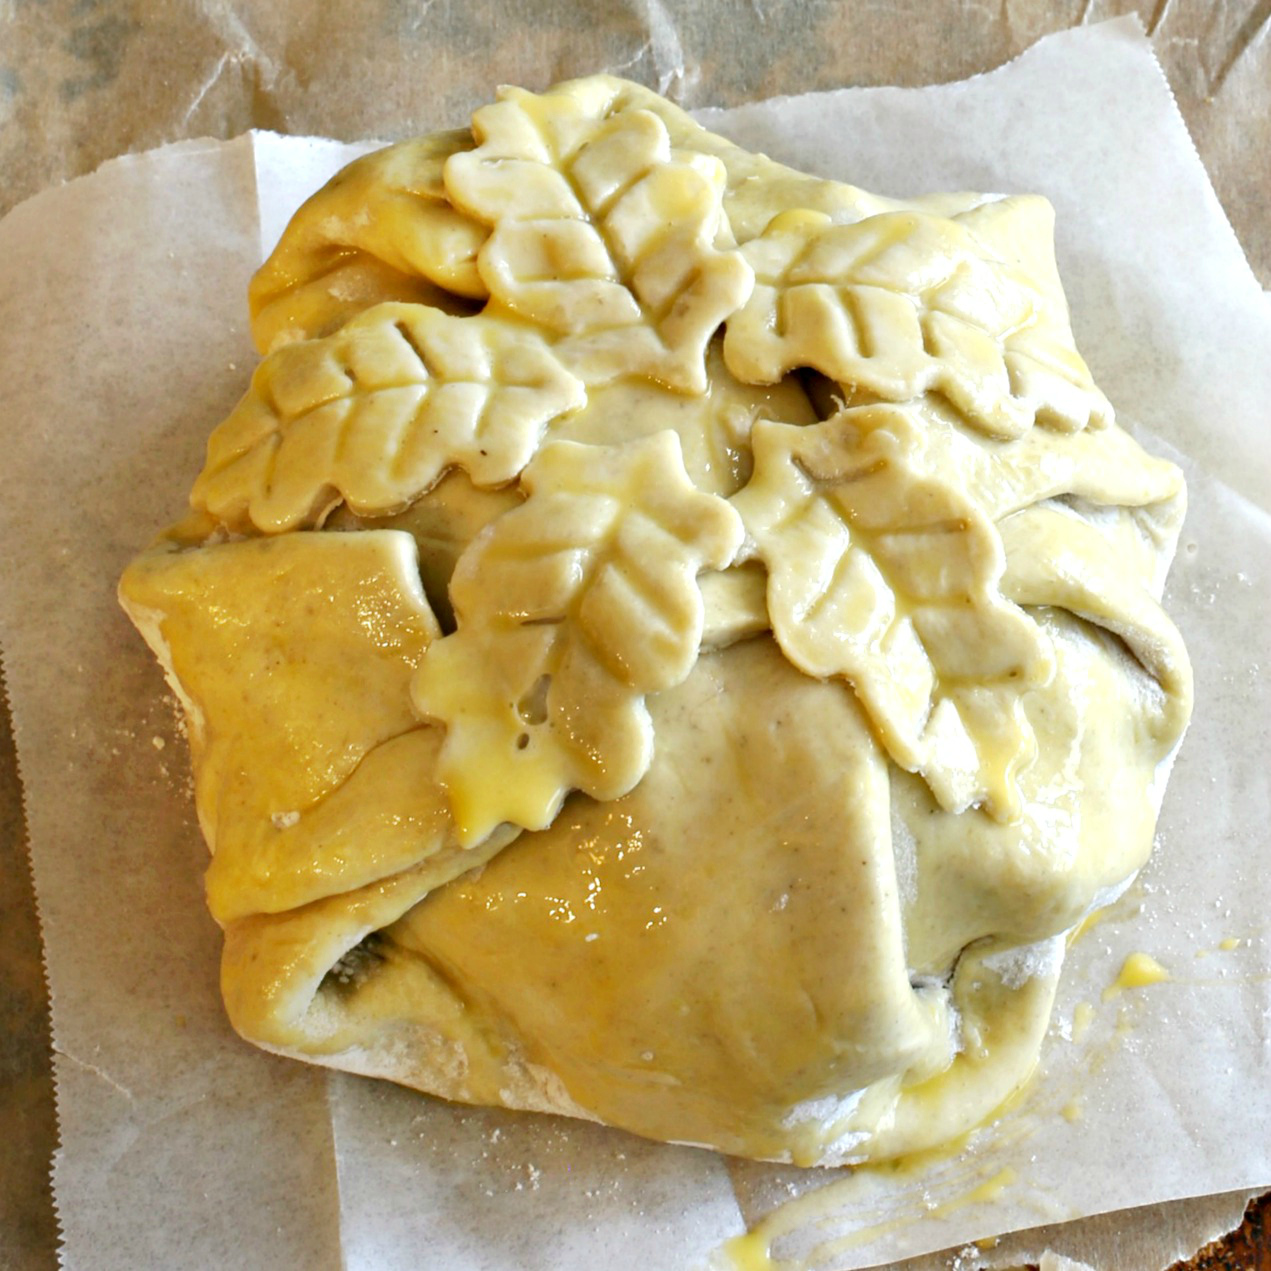 photo of brie wrapped with puff pastry dough brushed with egg and topped with leaf dough cut outs